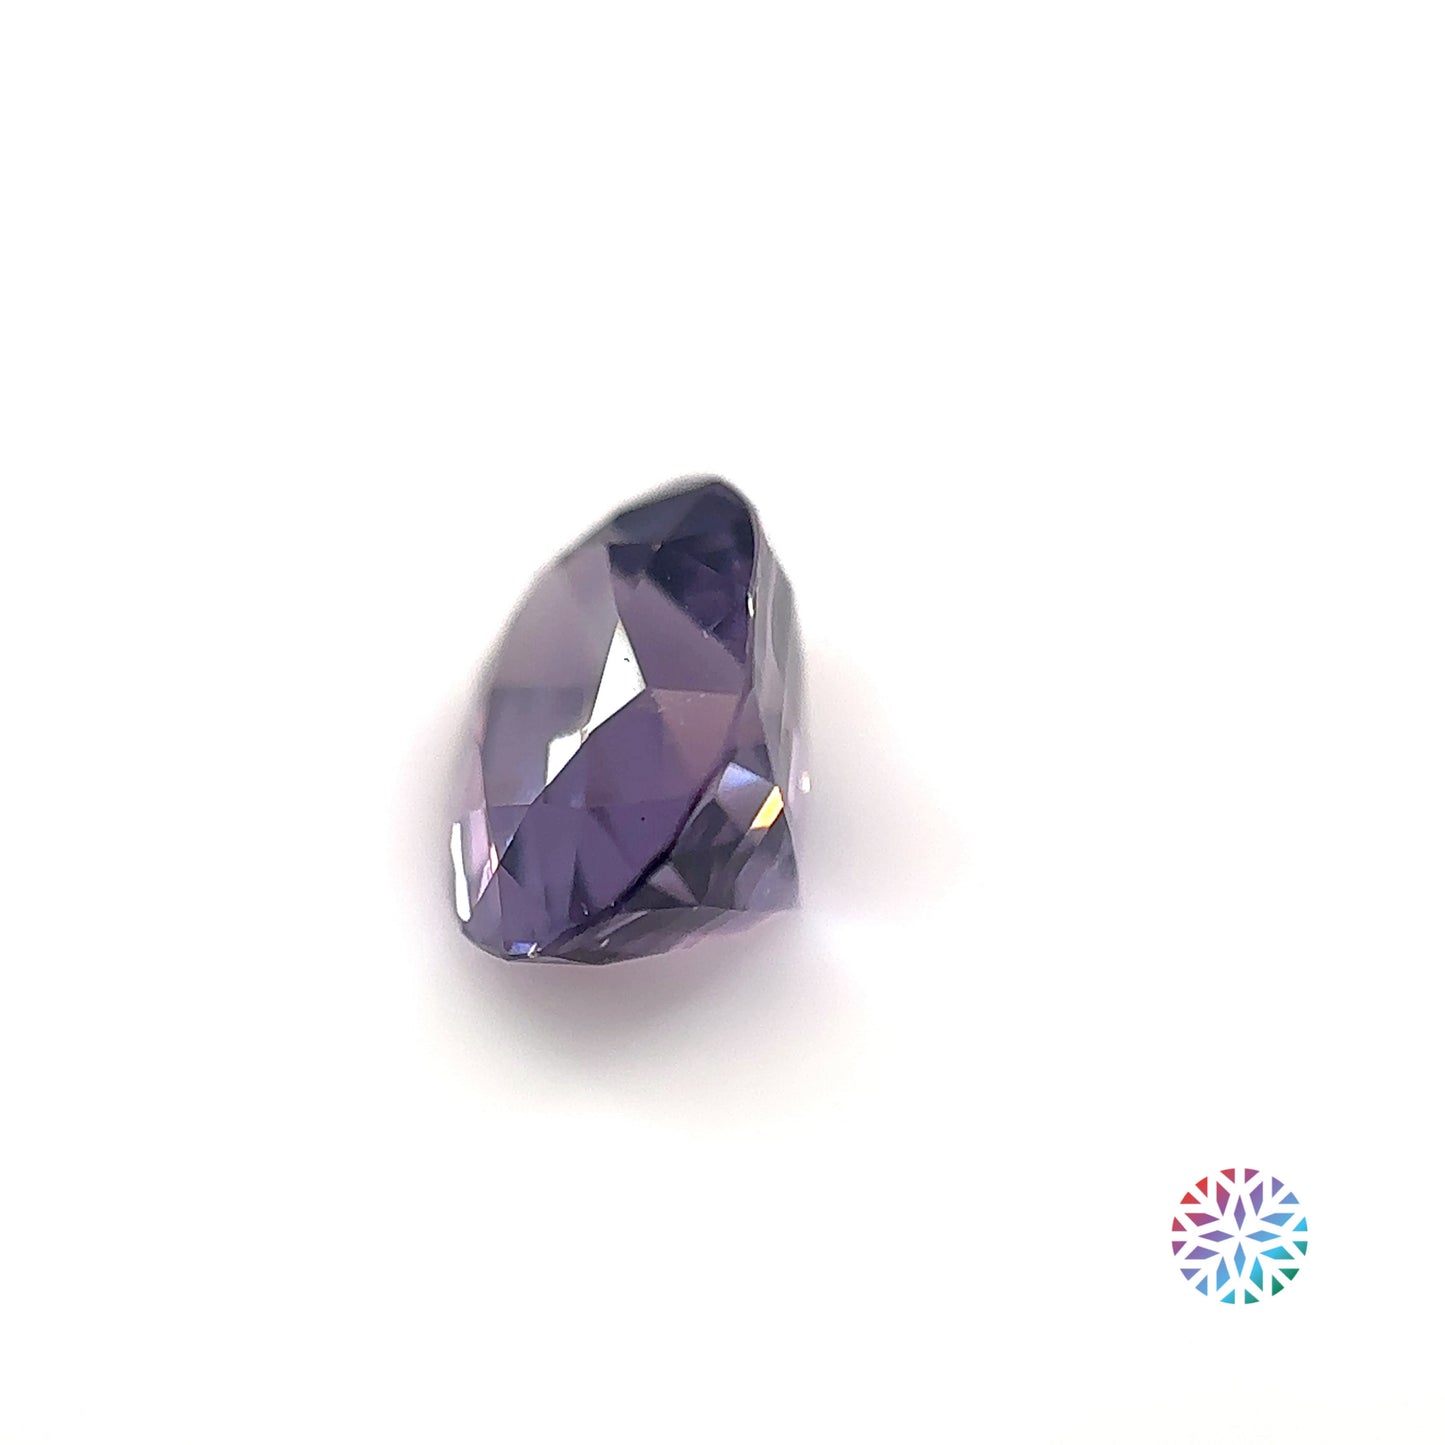 Lavender Spinel- Oval, 2.96ct, 9.4 x 7.2 x 5.9mm